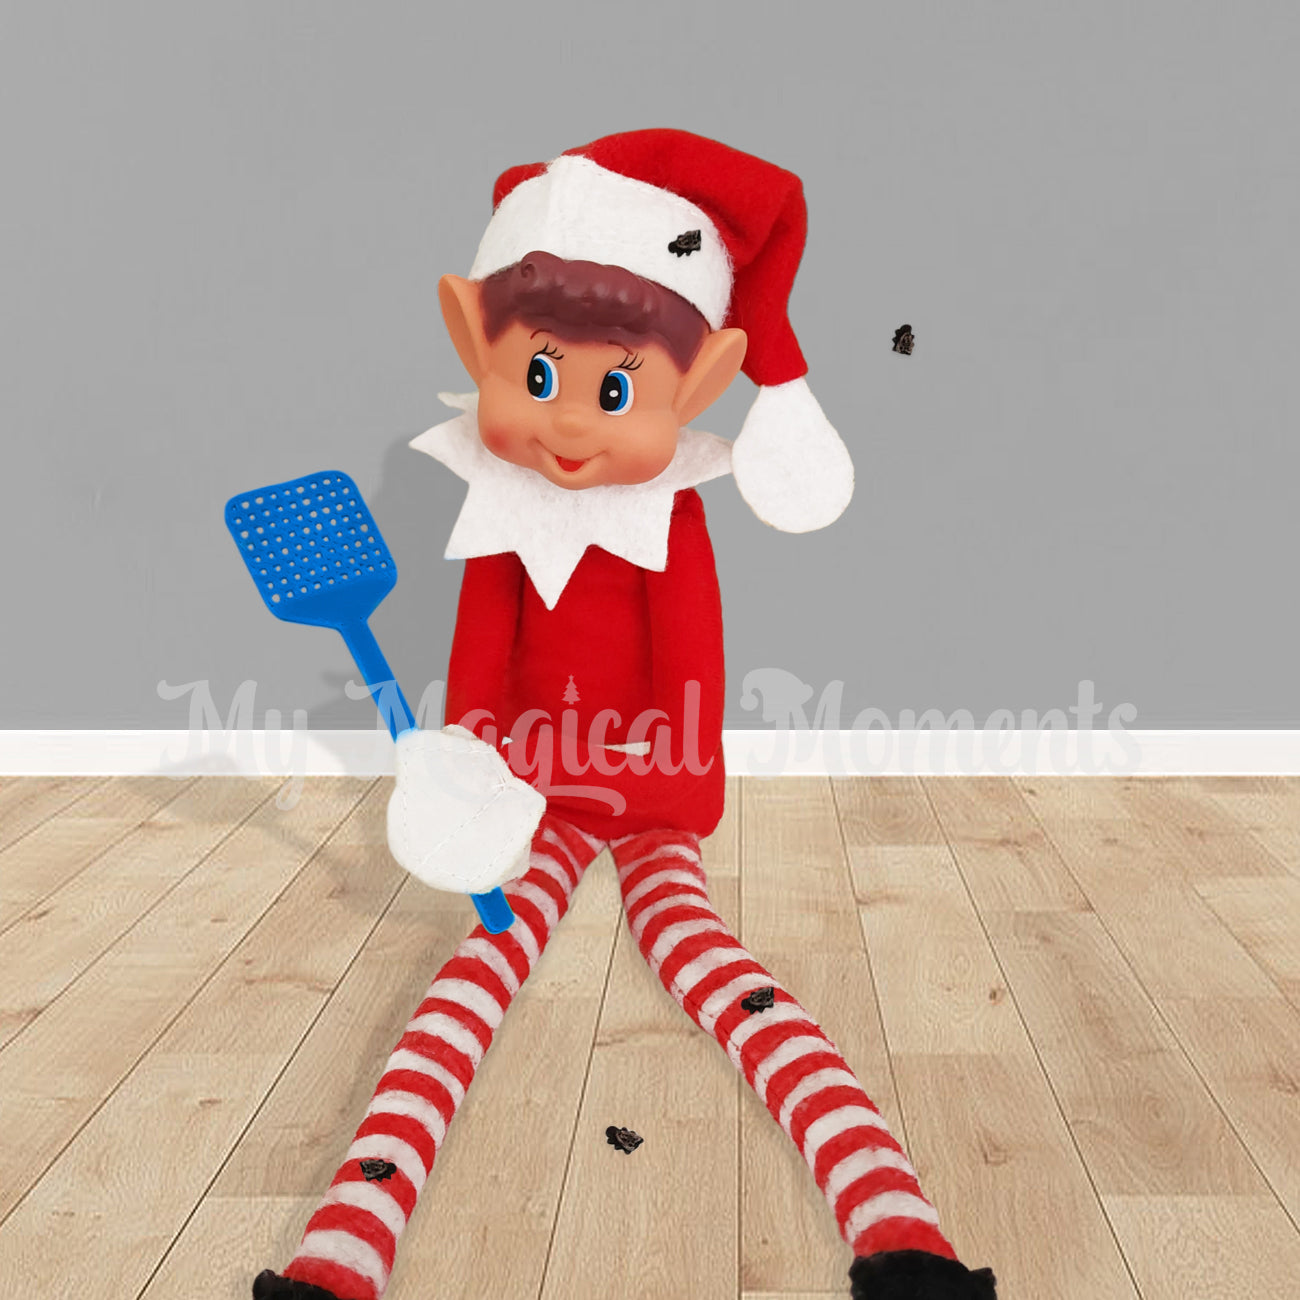 Fly Swatter elf prop with extra flies featuring Elves behavin badly elf. By My Magical Moments